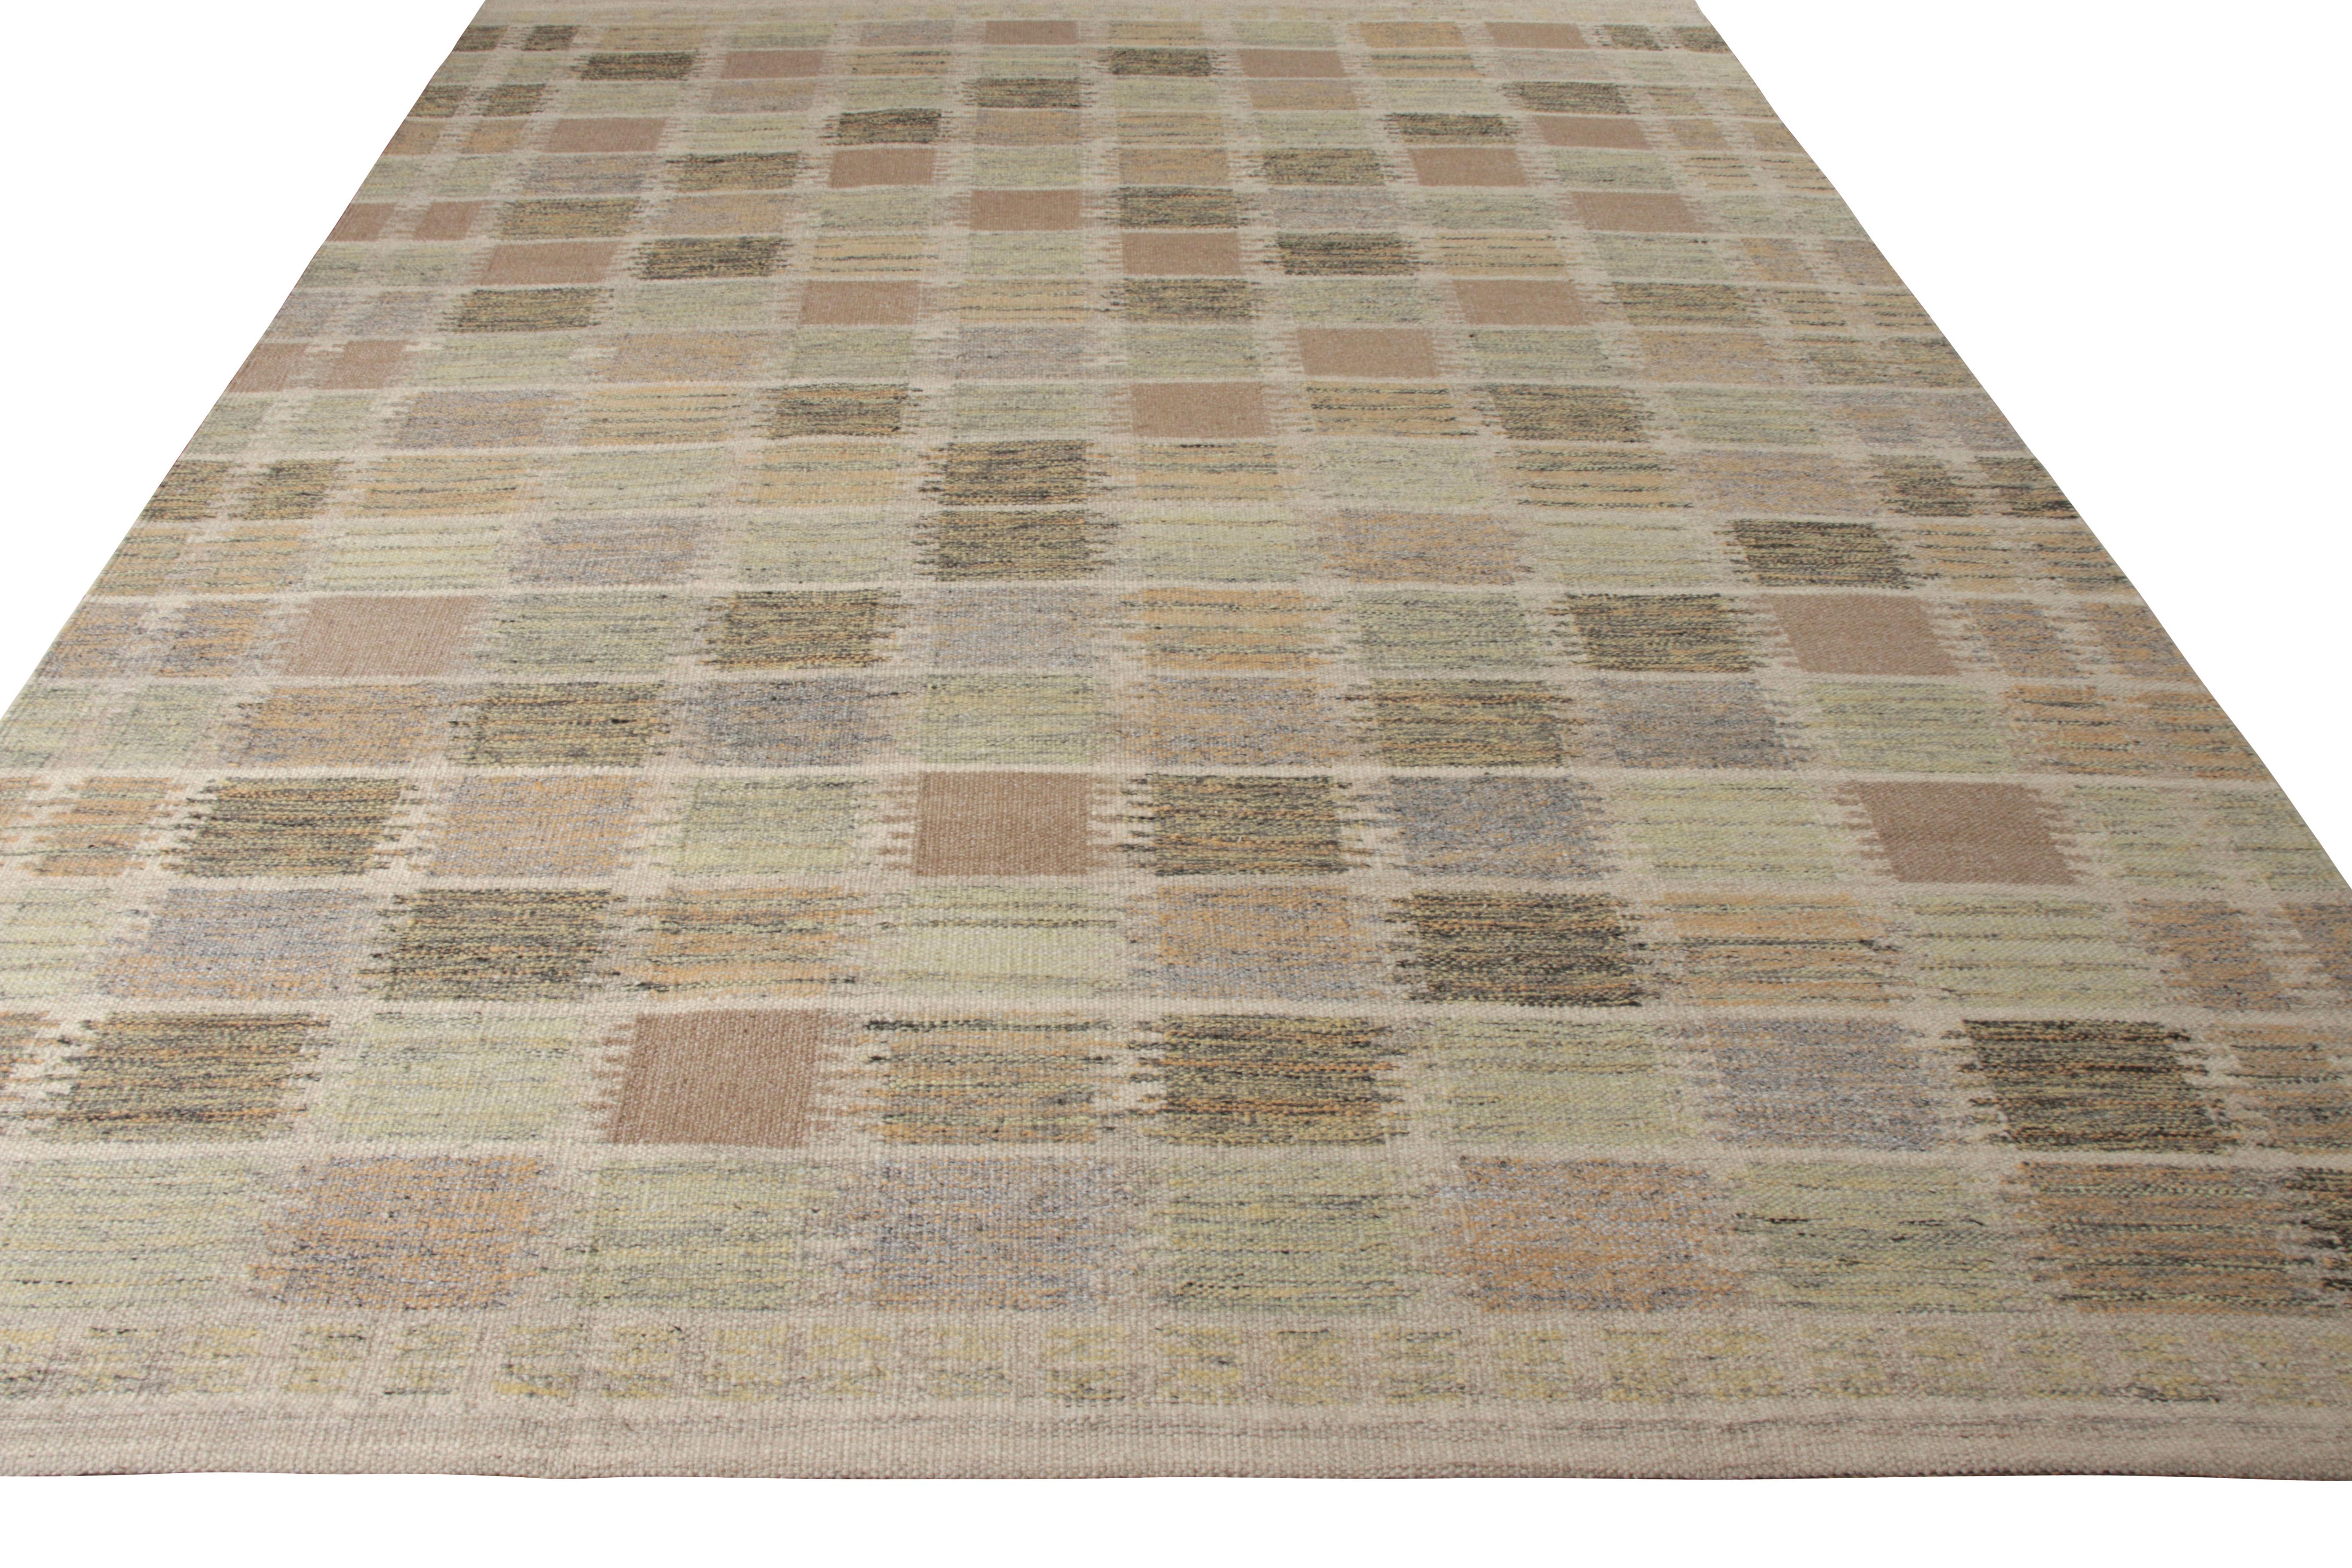 A 9 x 12 Kilim joining the Scandinavian Collection by Rug & Kilim—recapturing Swedish Modernism as a new language in design. Handwoven in wool, the geometric pattern in subtle tints of pink, beige, and gray is an elegant interpretation of